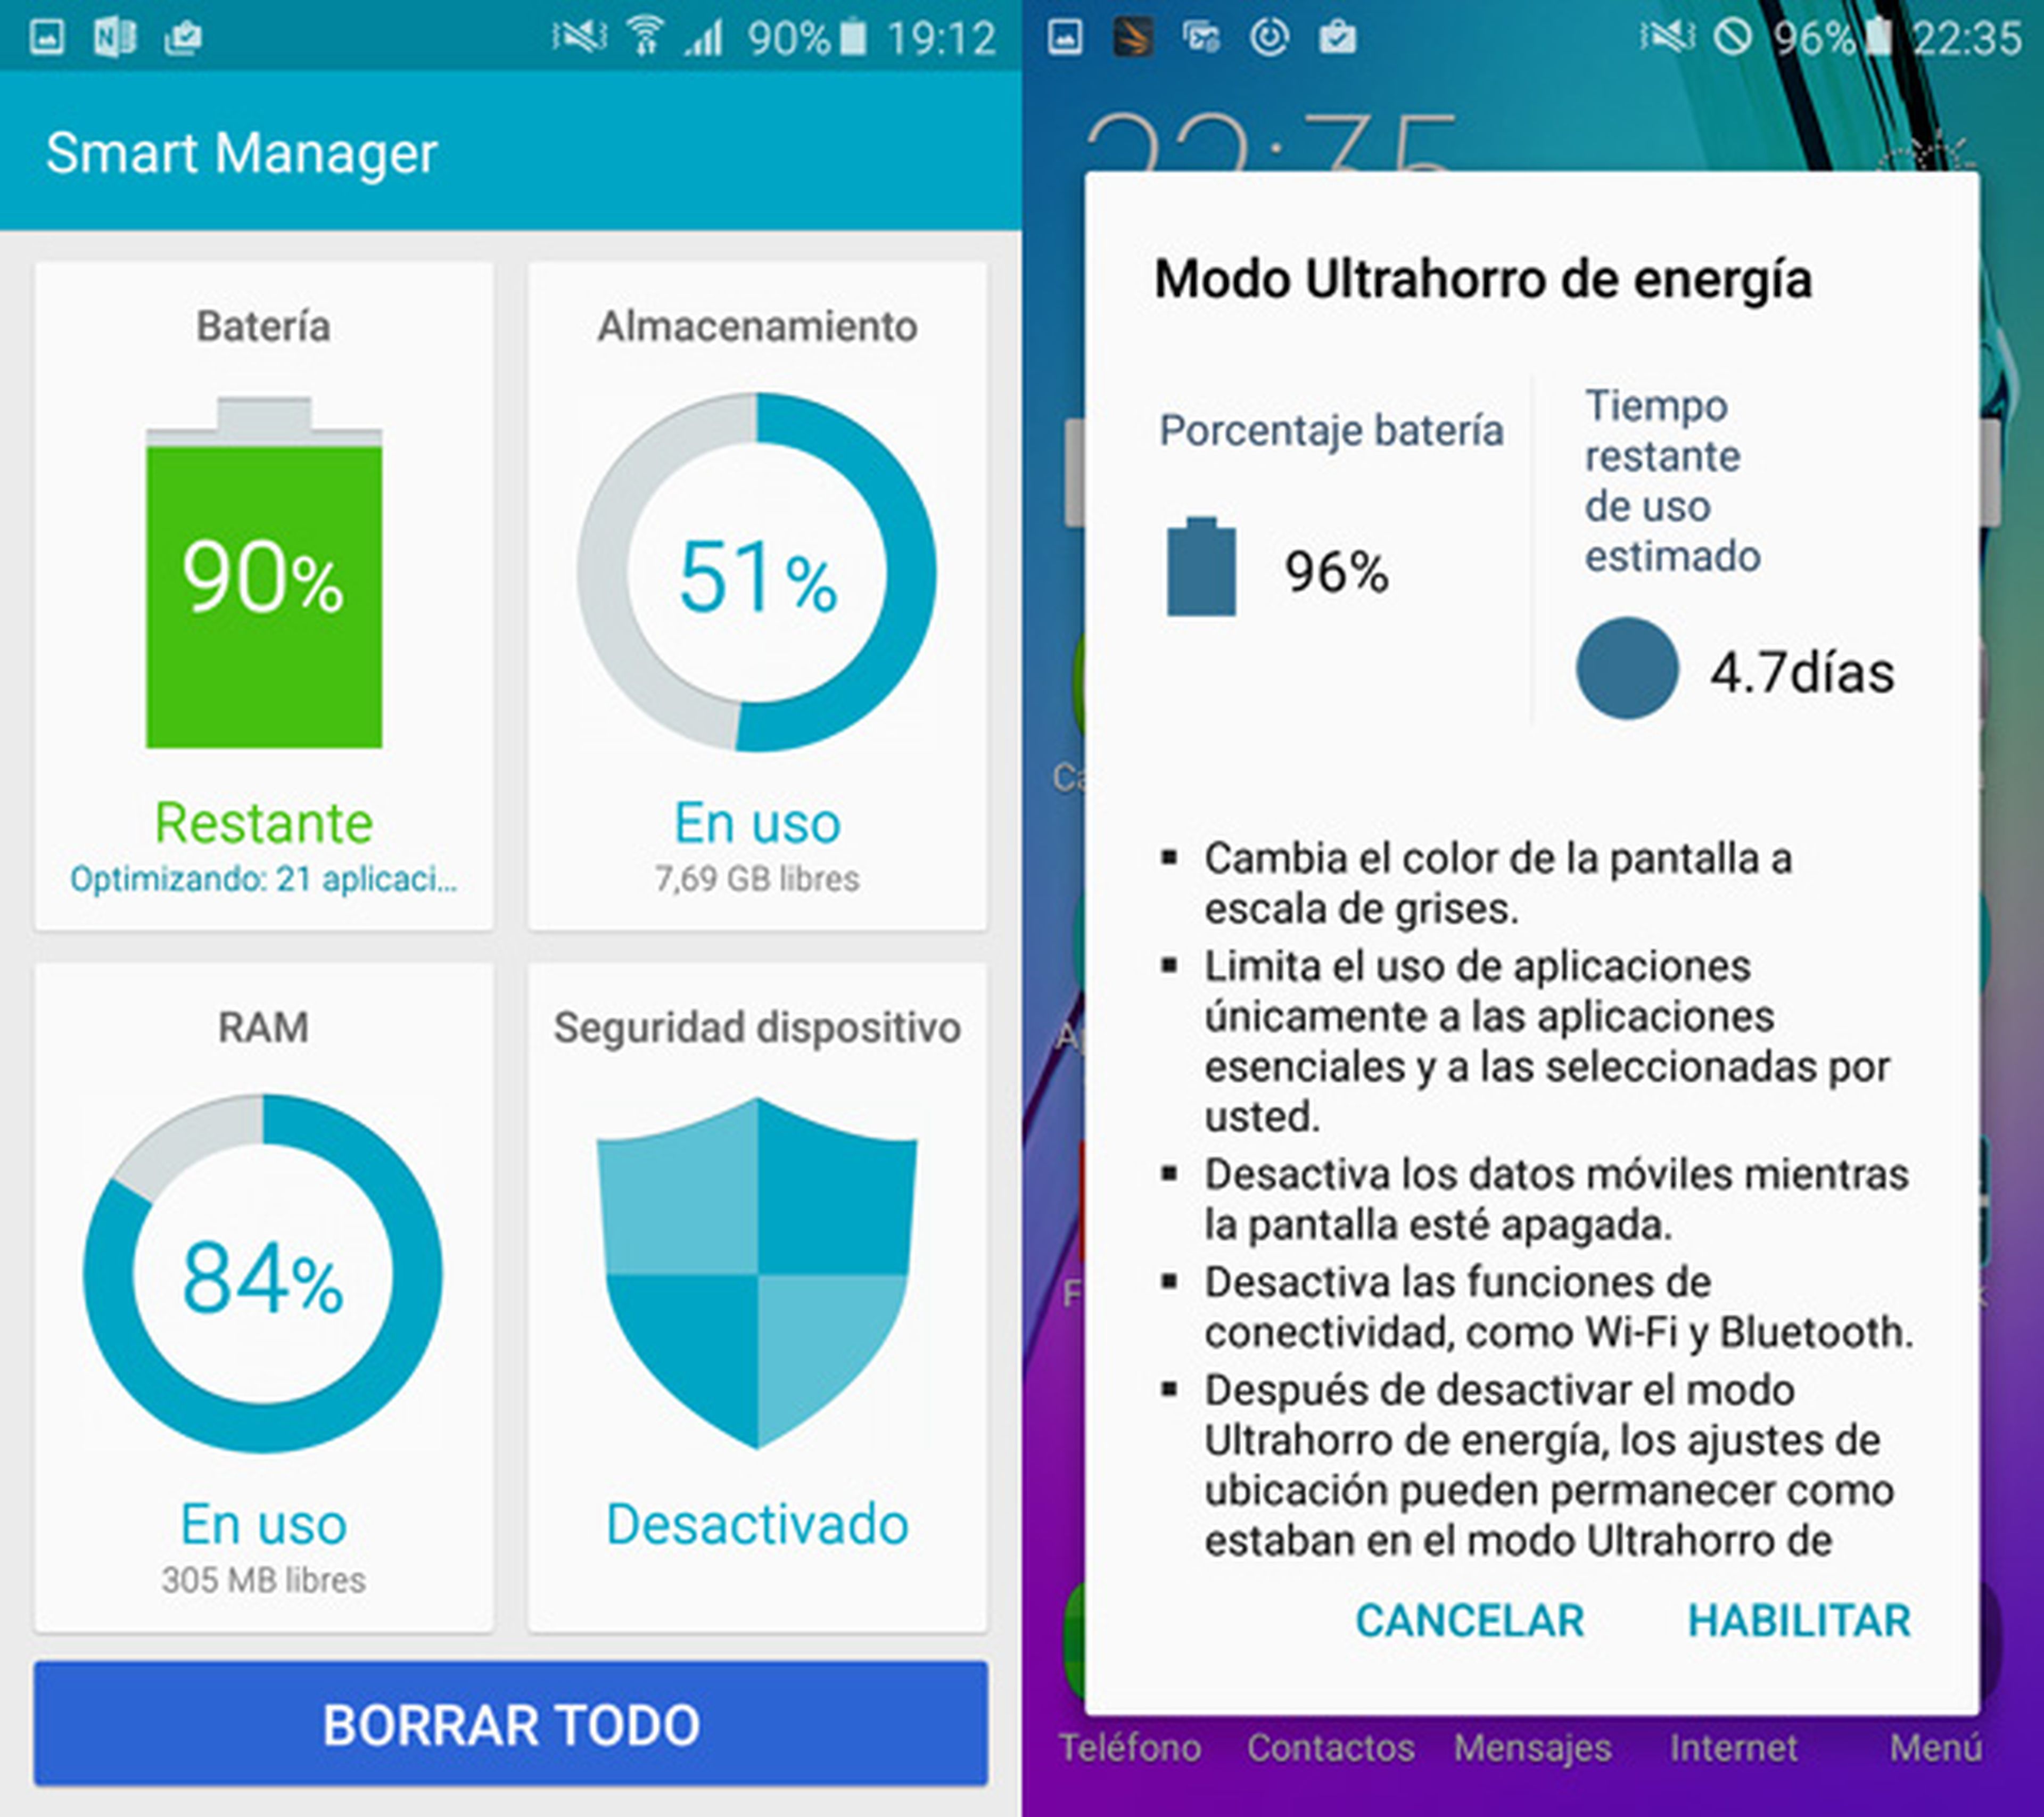 smartmanager A5 2016